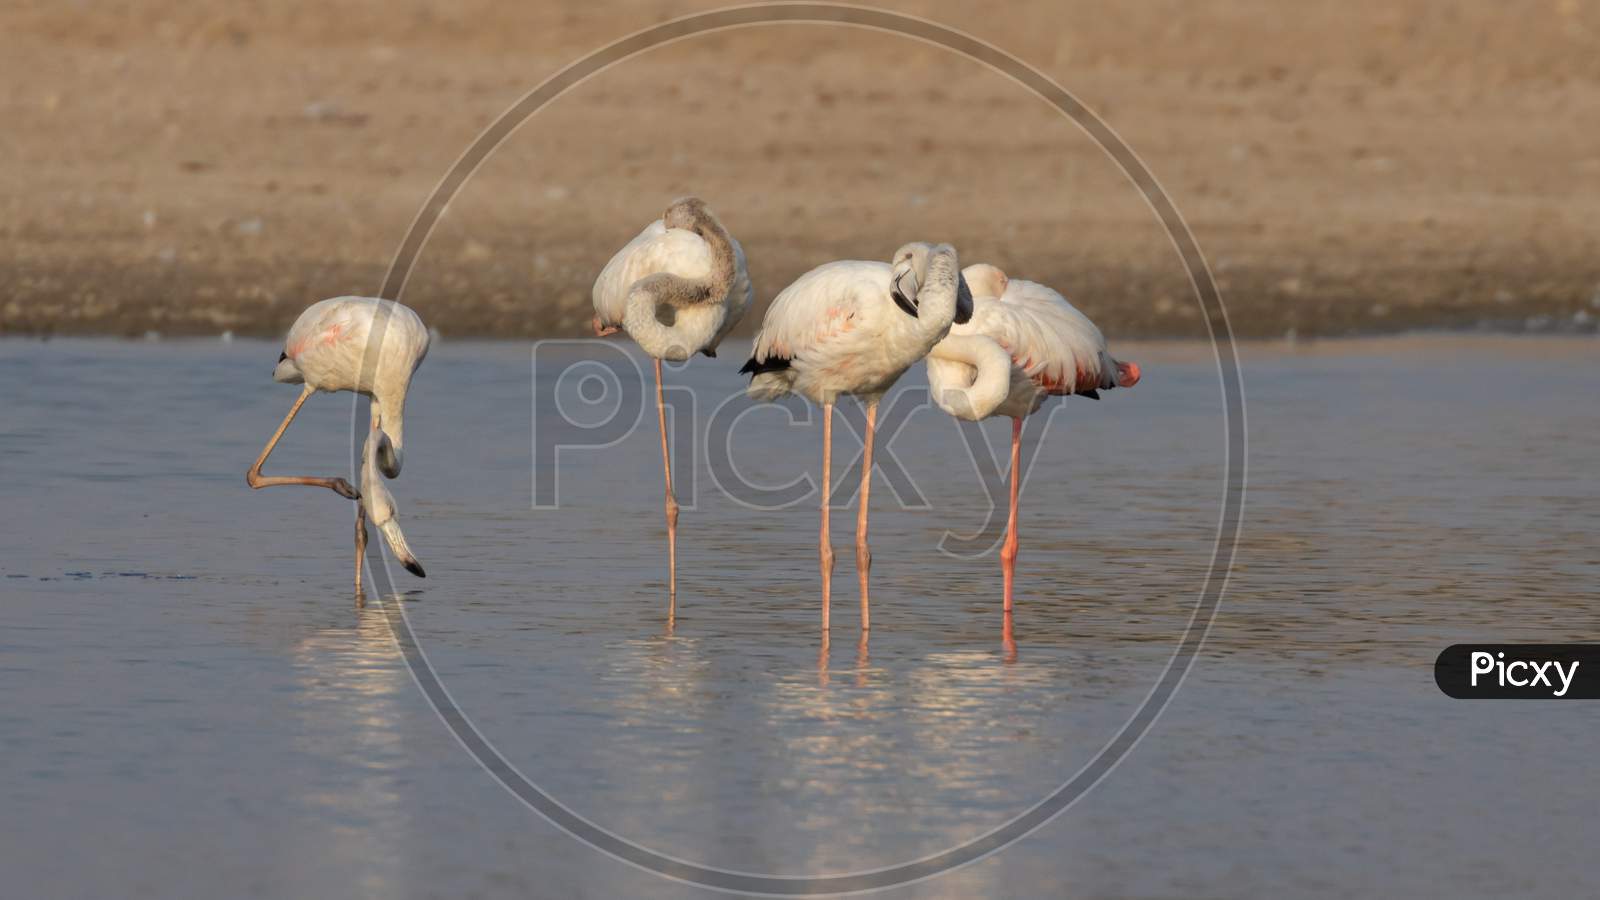 Greater flamingos standing inside water with  their necks curled